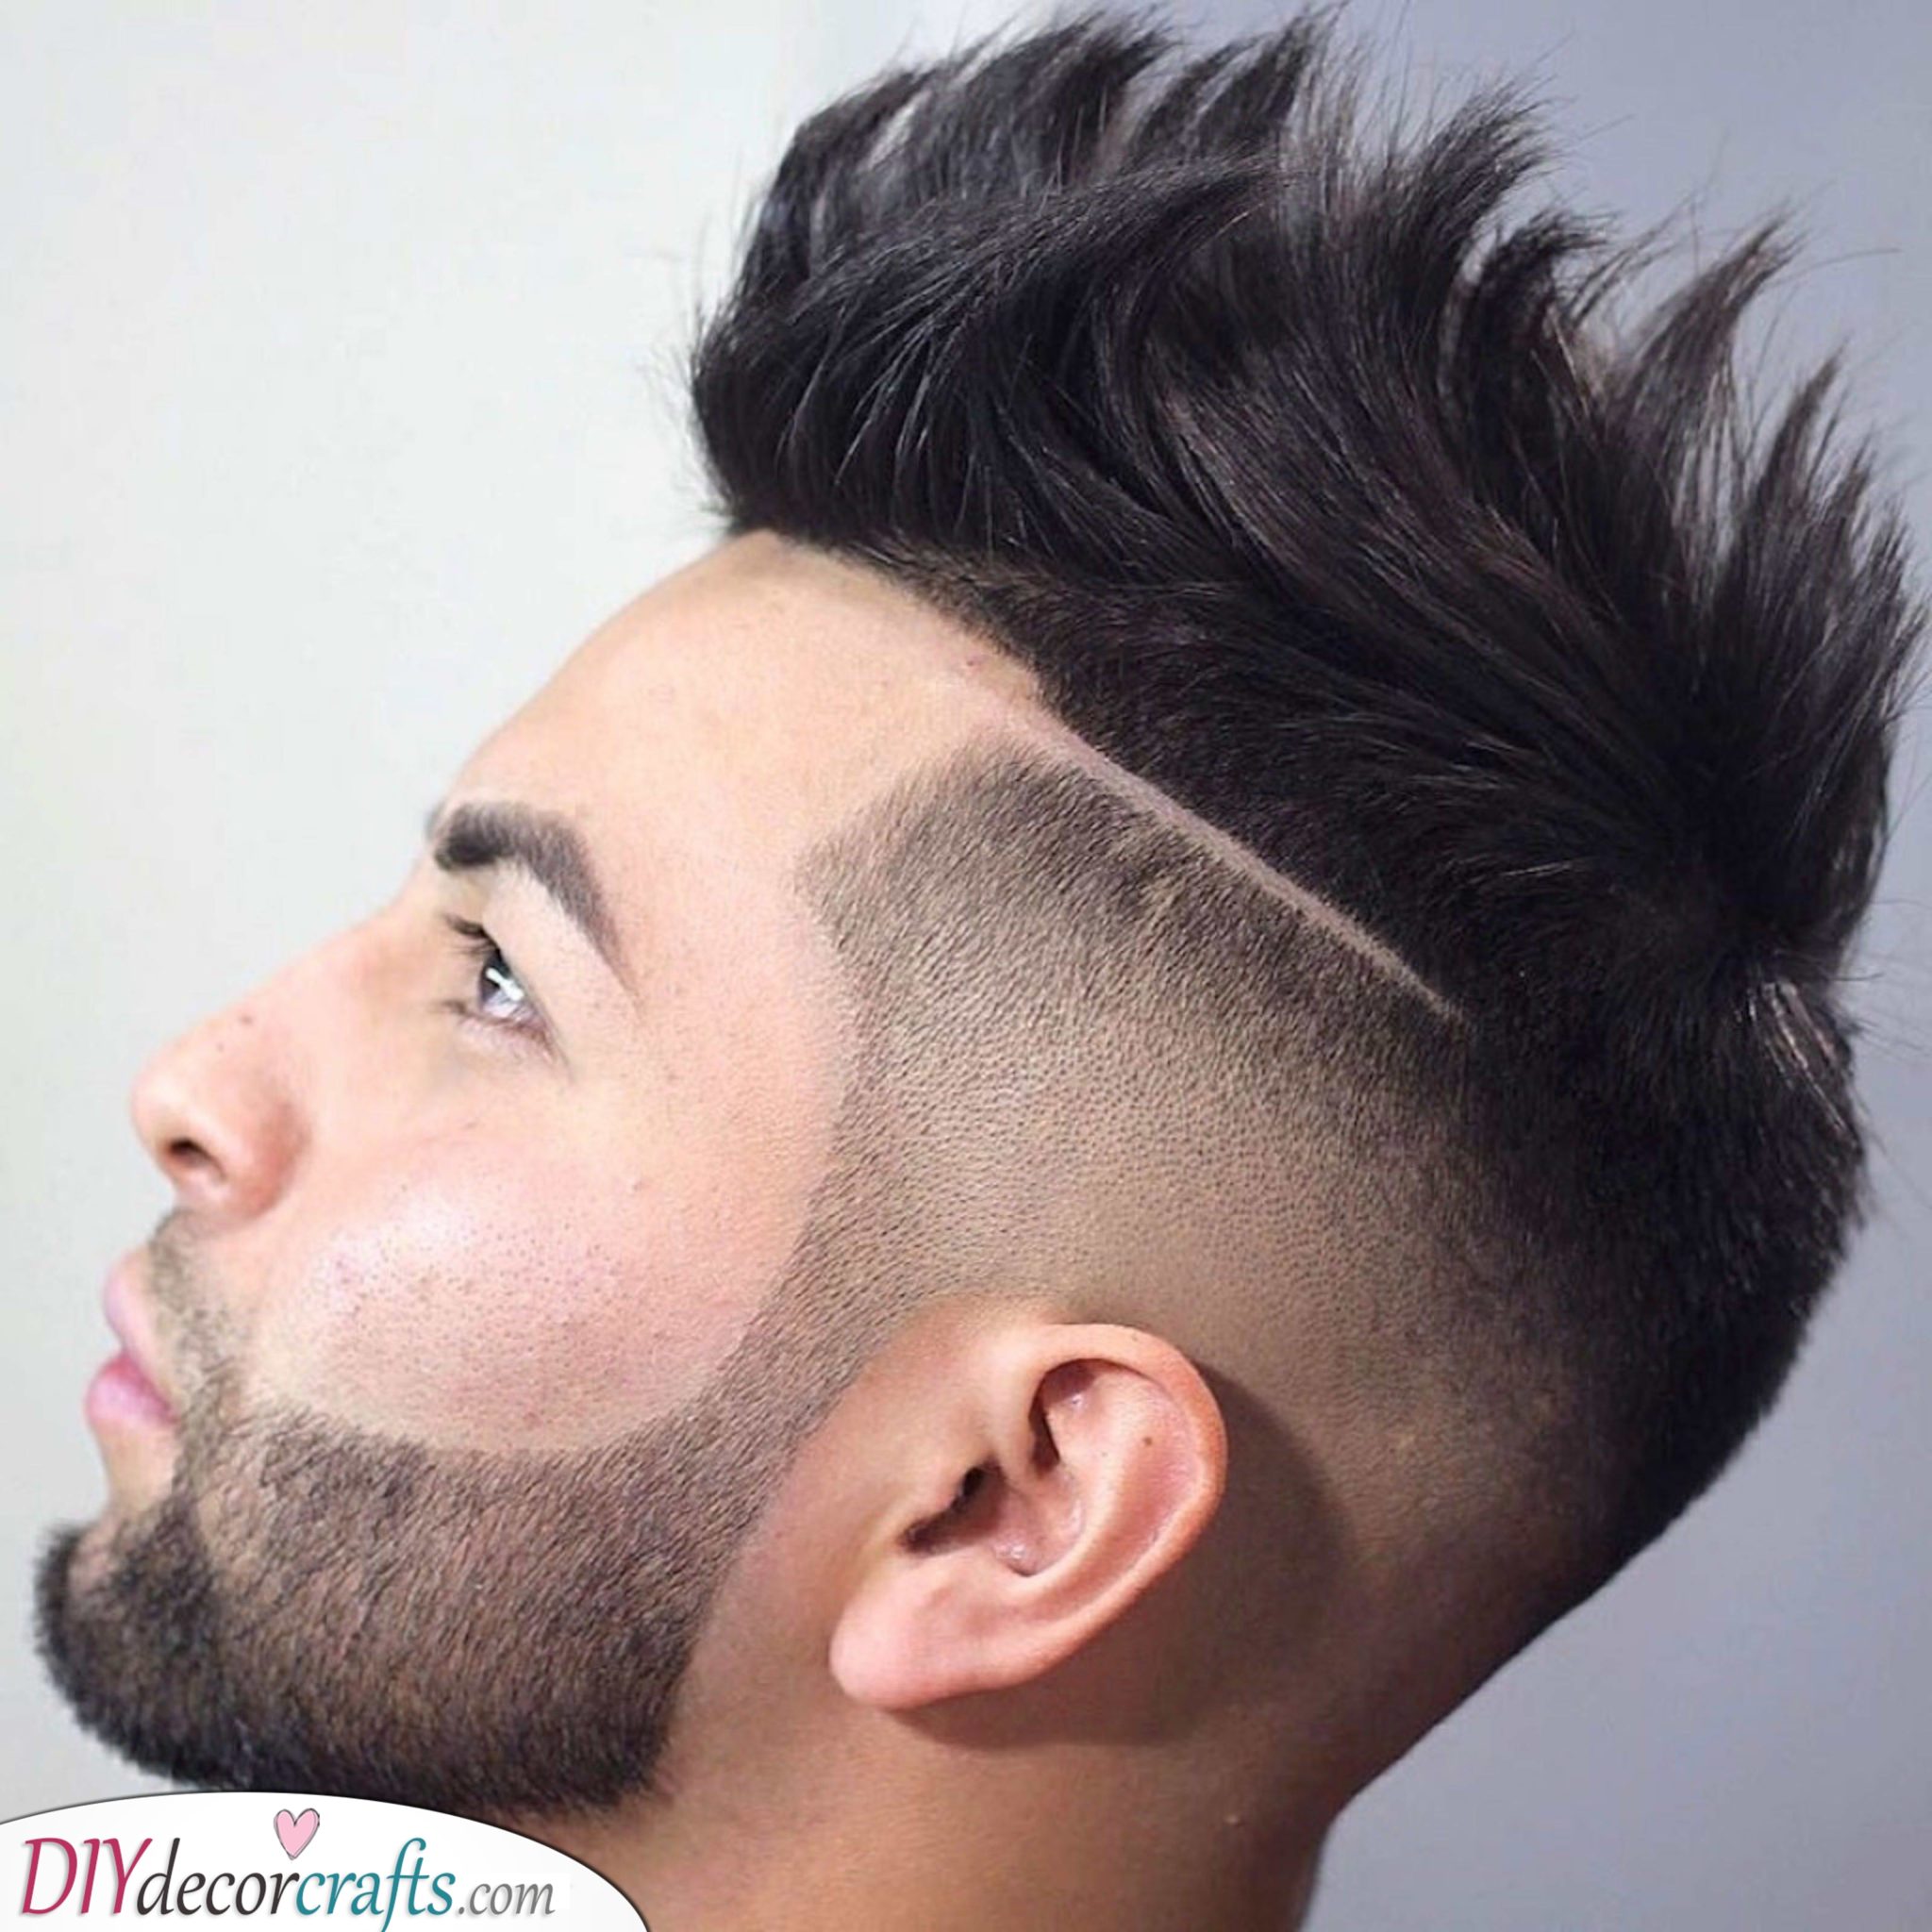 A Trendy Fade - On the Face and Head